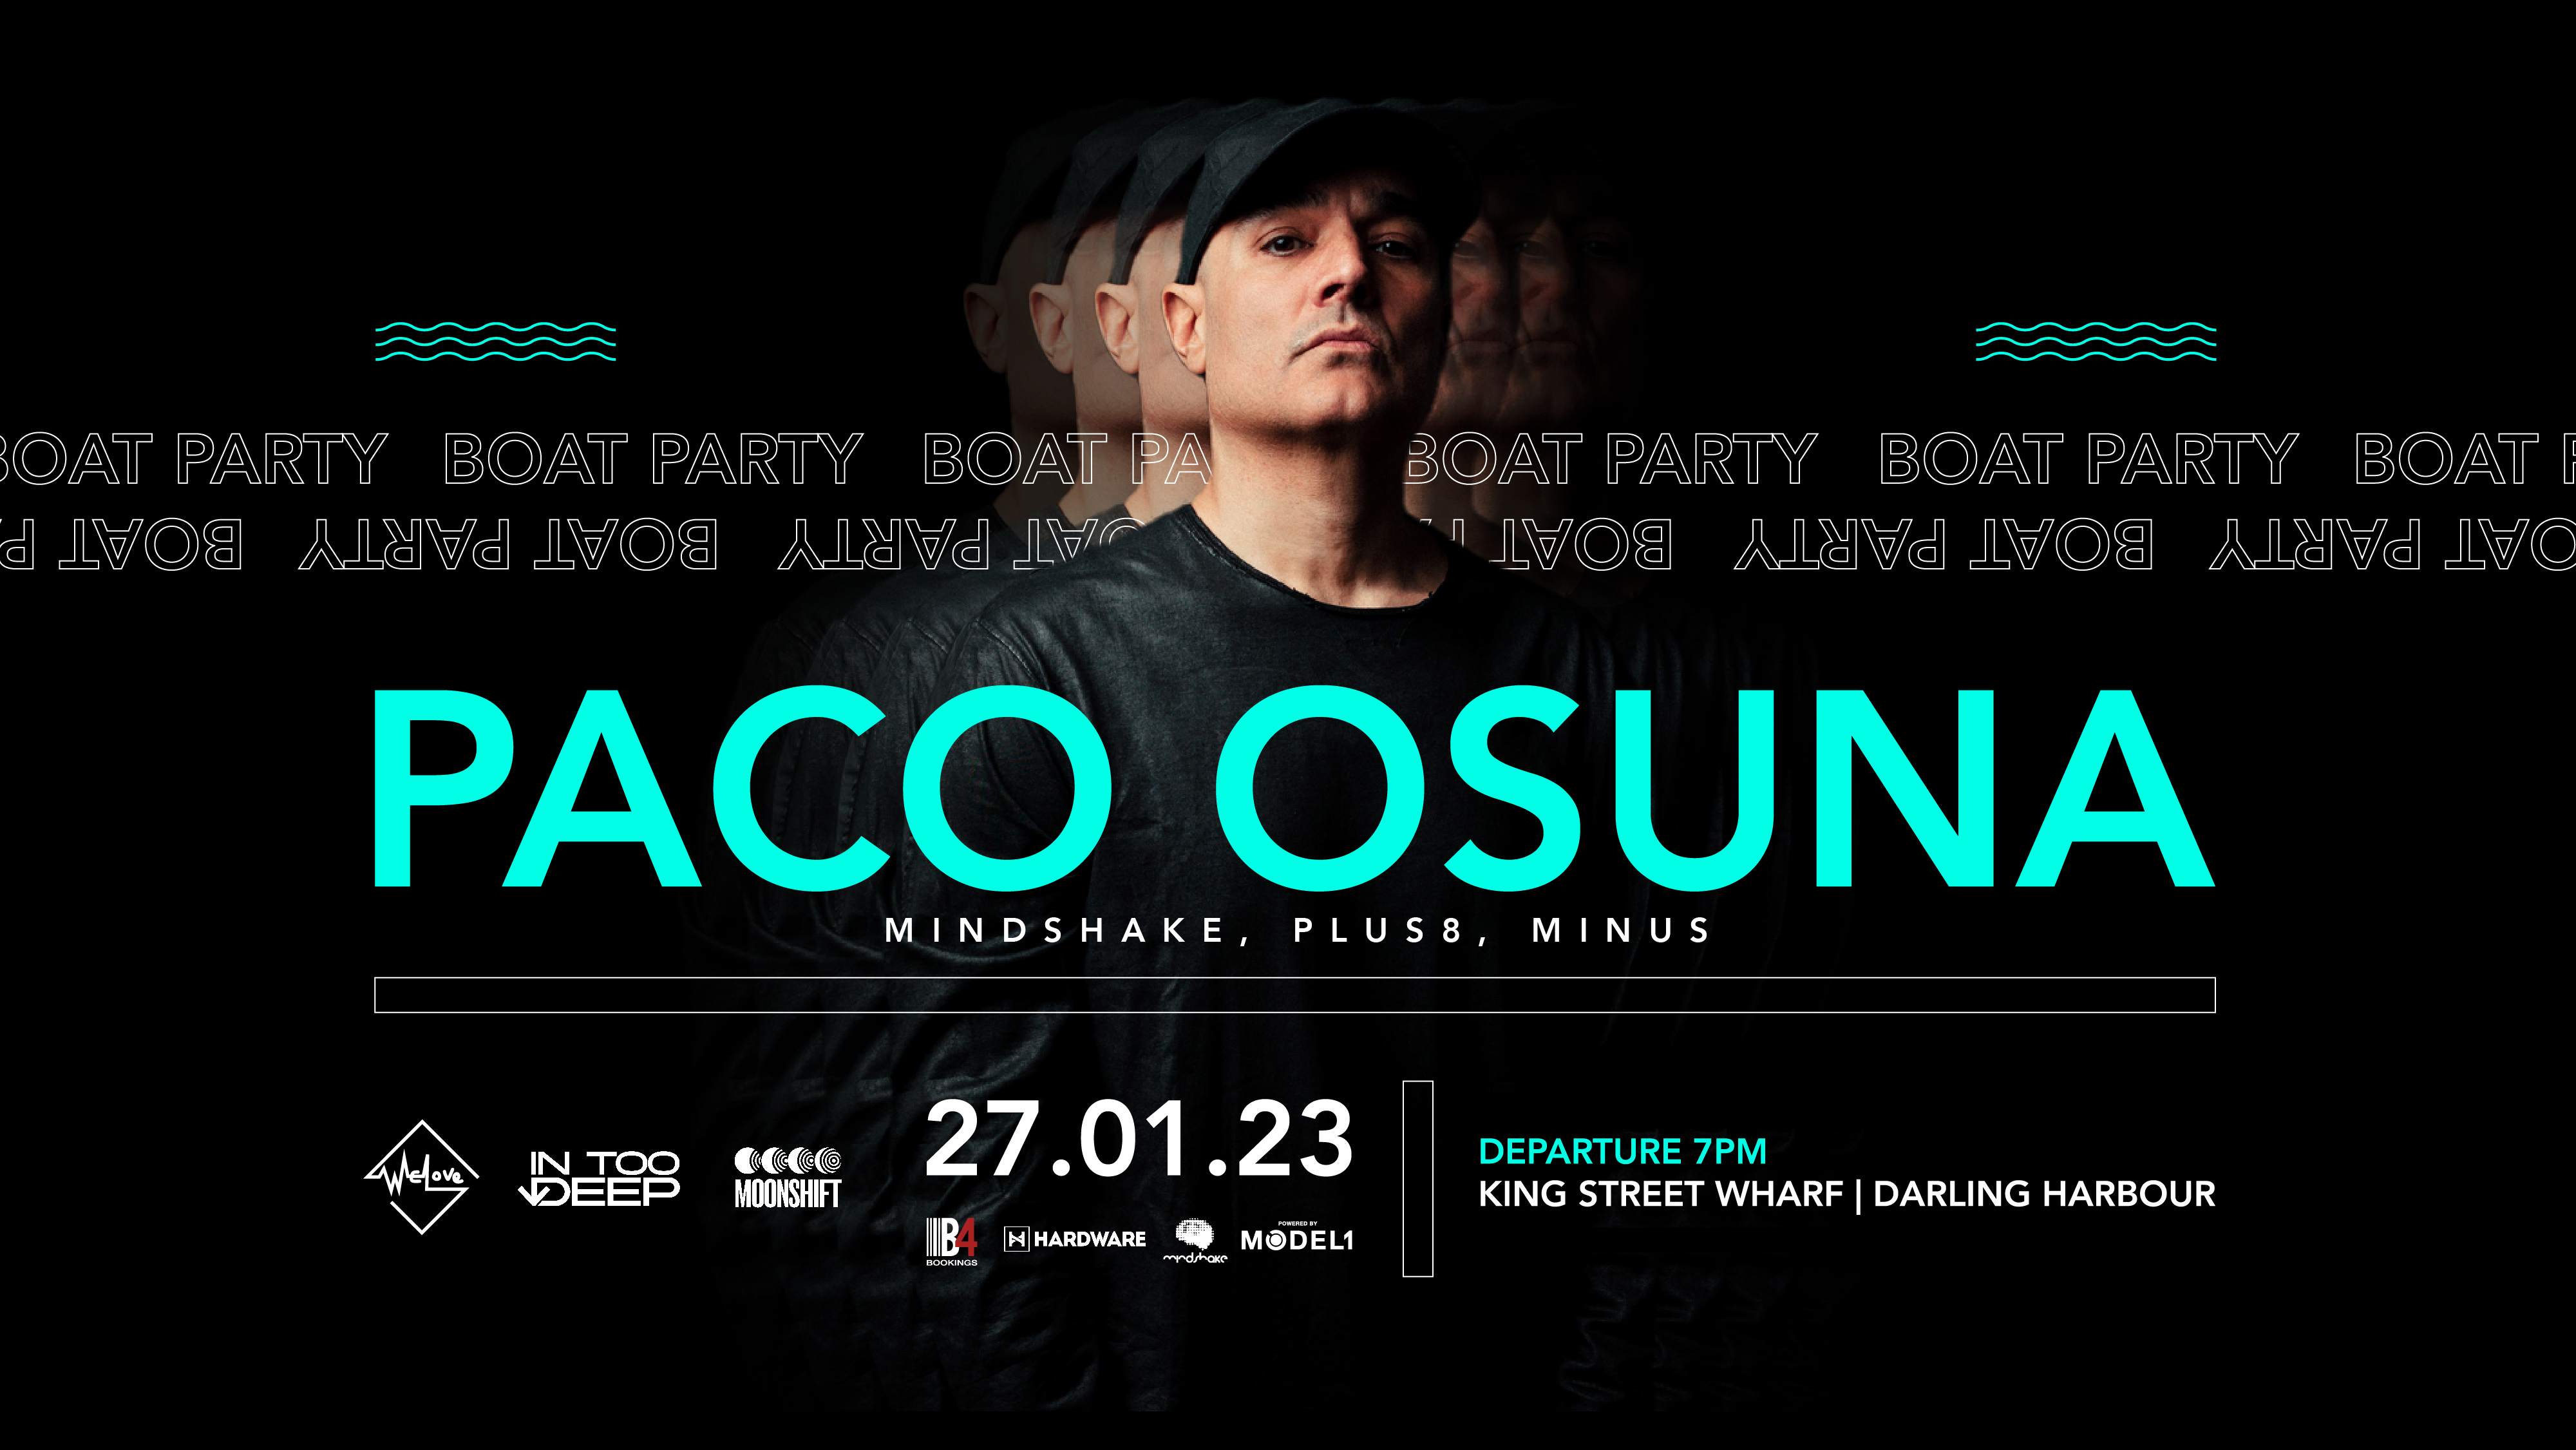 Paco Osuna - Sydney Boat Party - フライヤー表